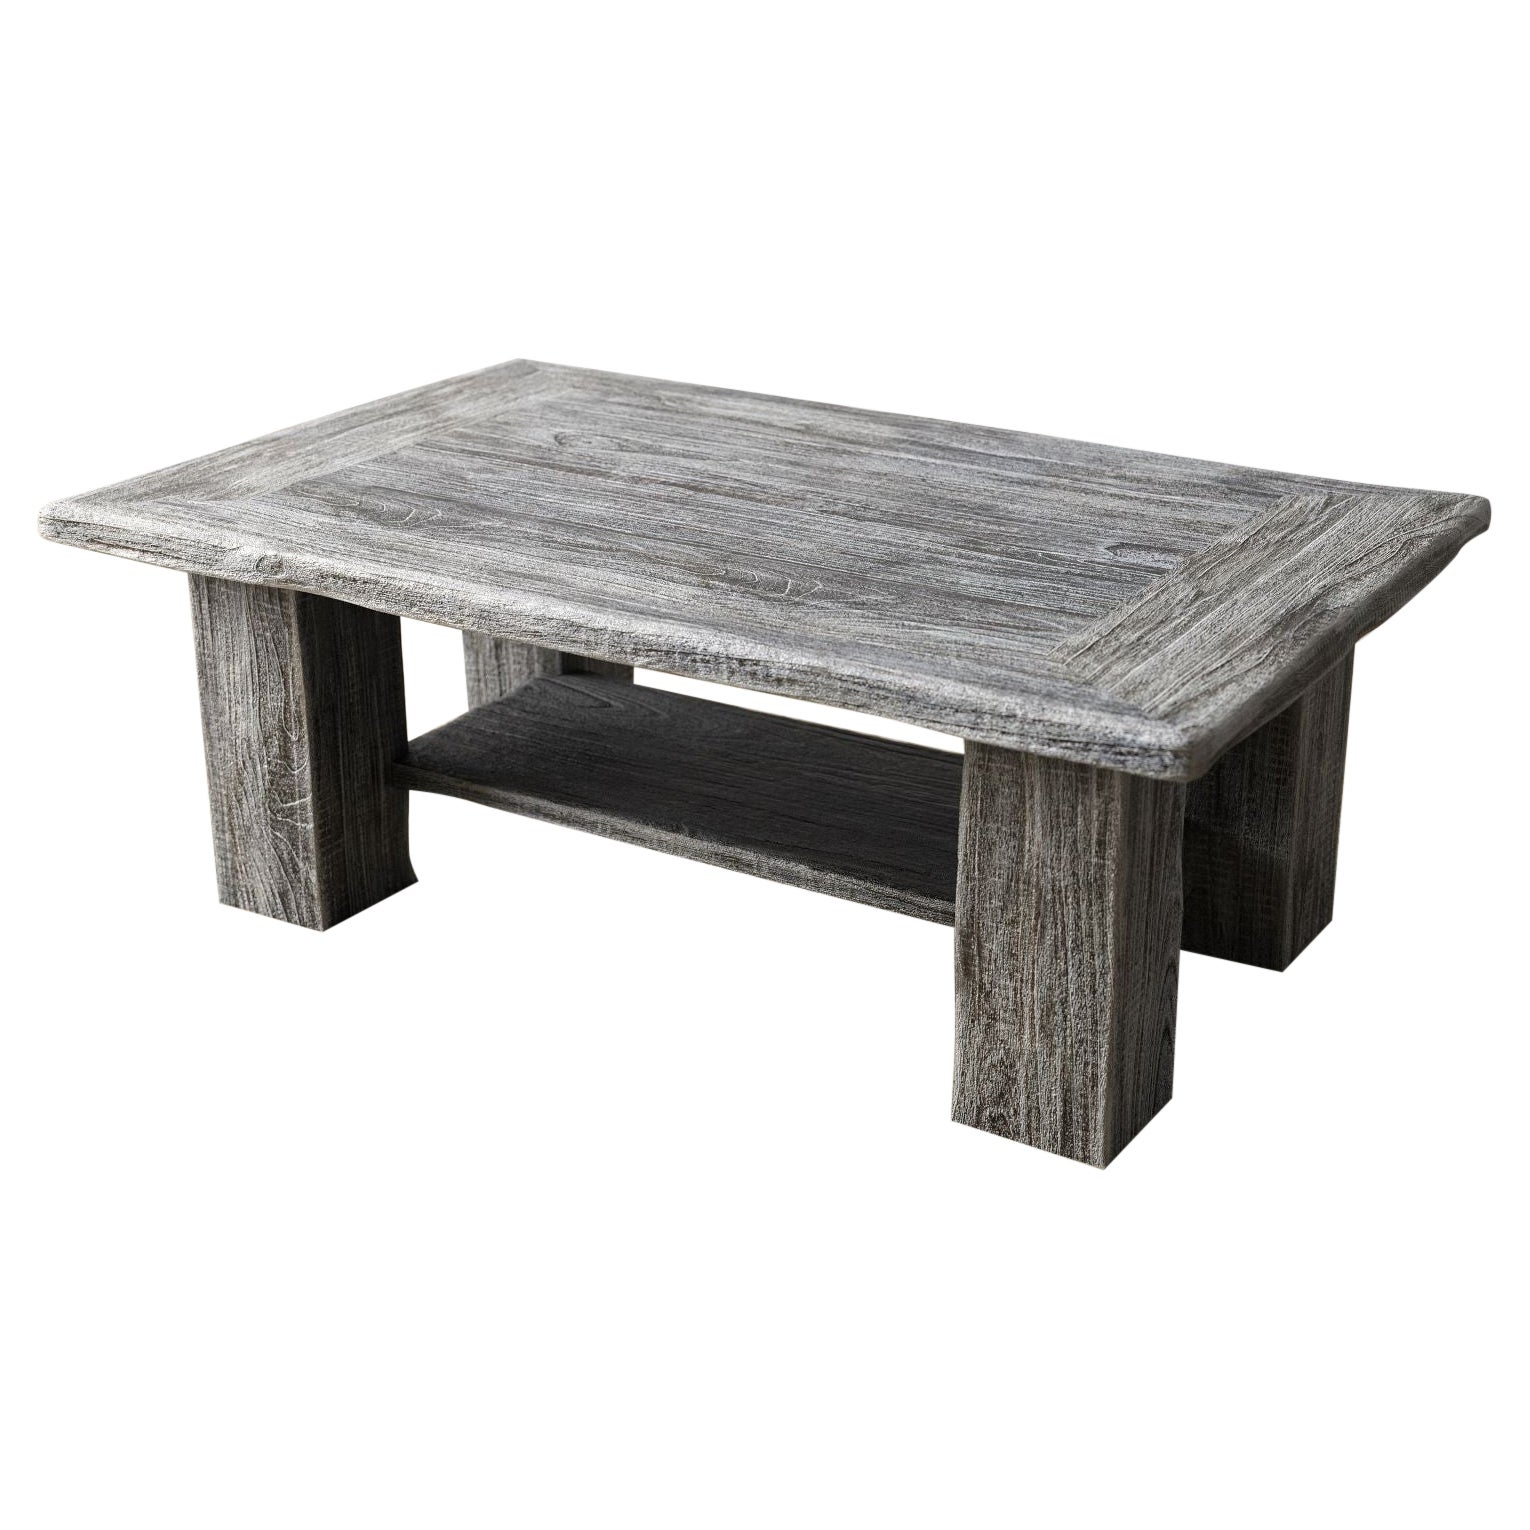 Solid Teak Sandblasted Coffee Table with Lower Shelf in Weathered For Sale